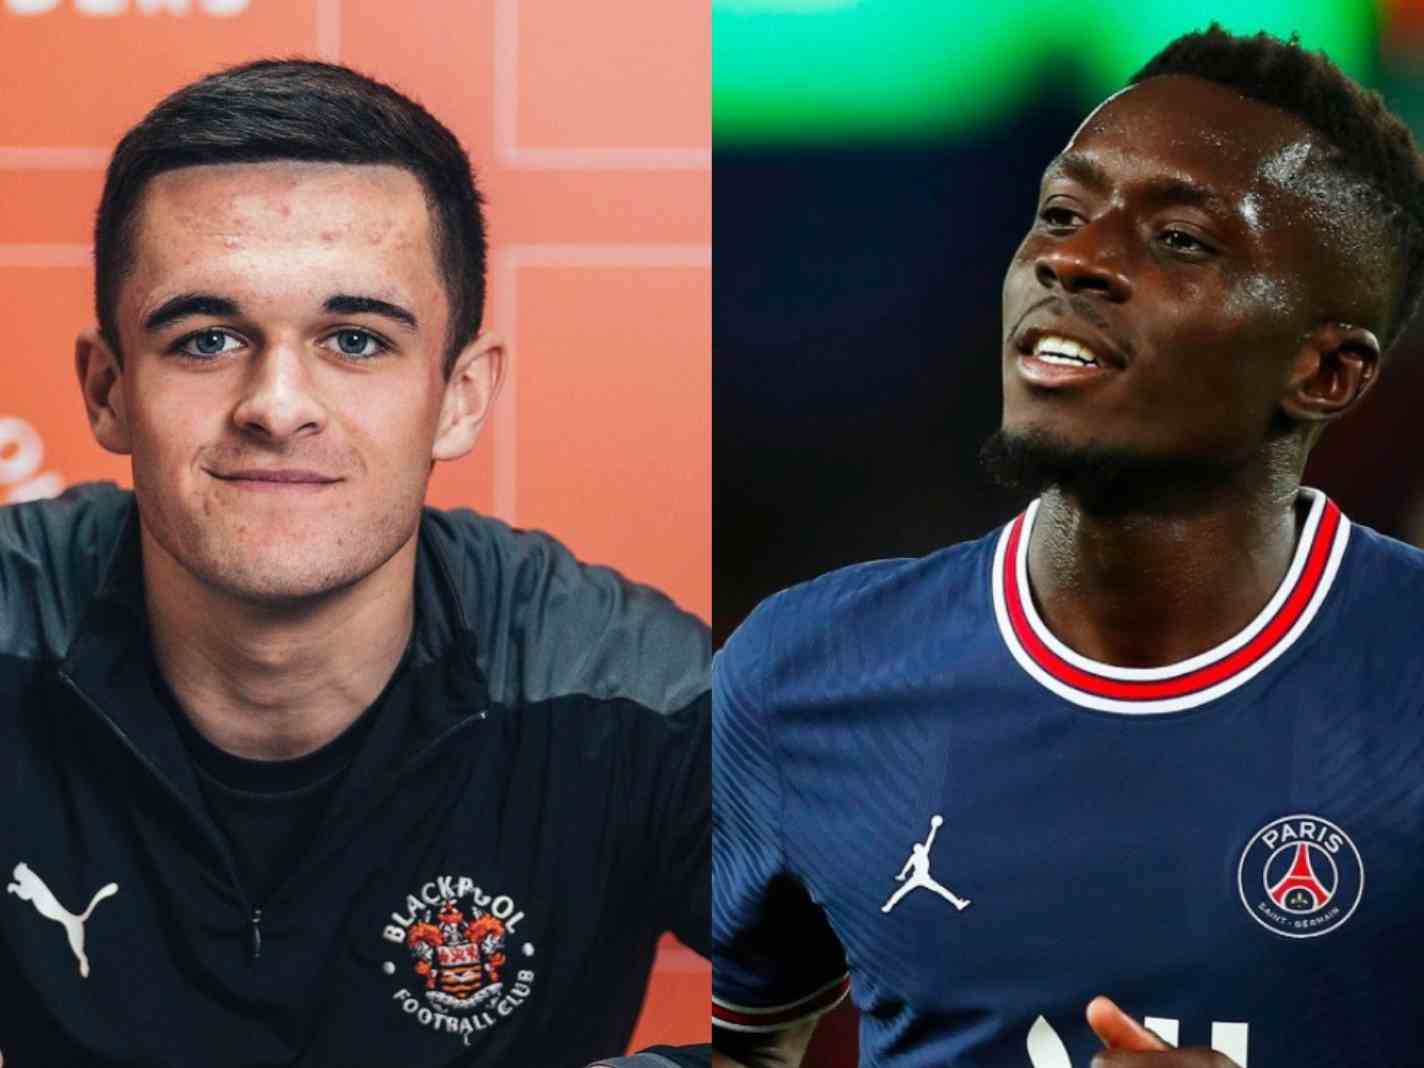 In this image - Jake Daniels and Idrissa Gueye